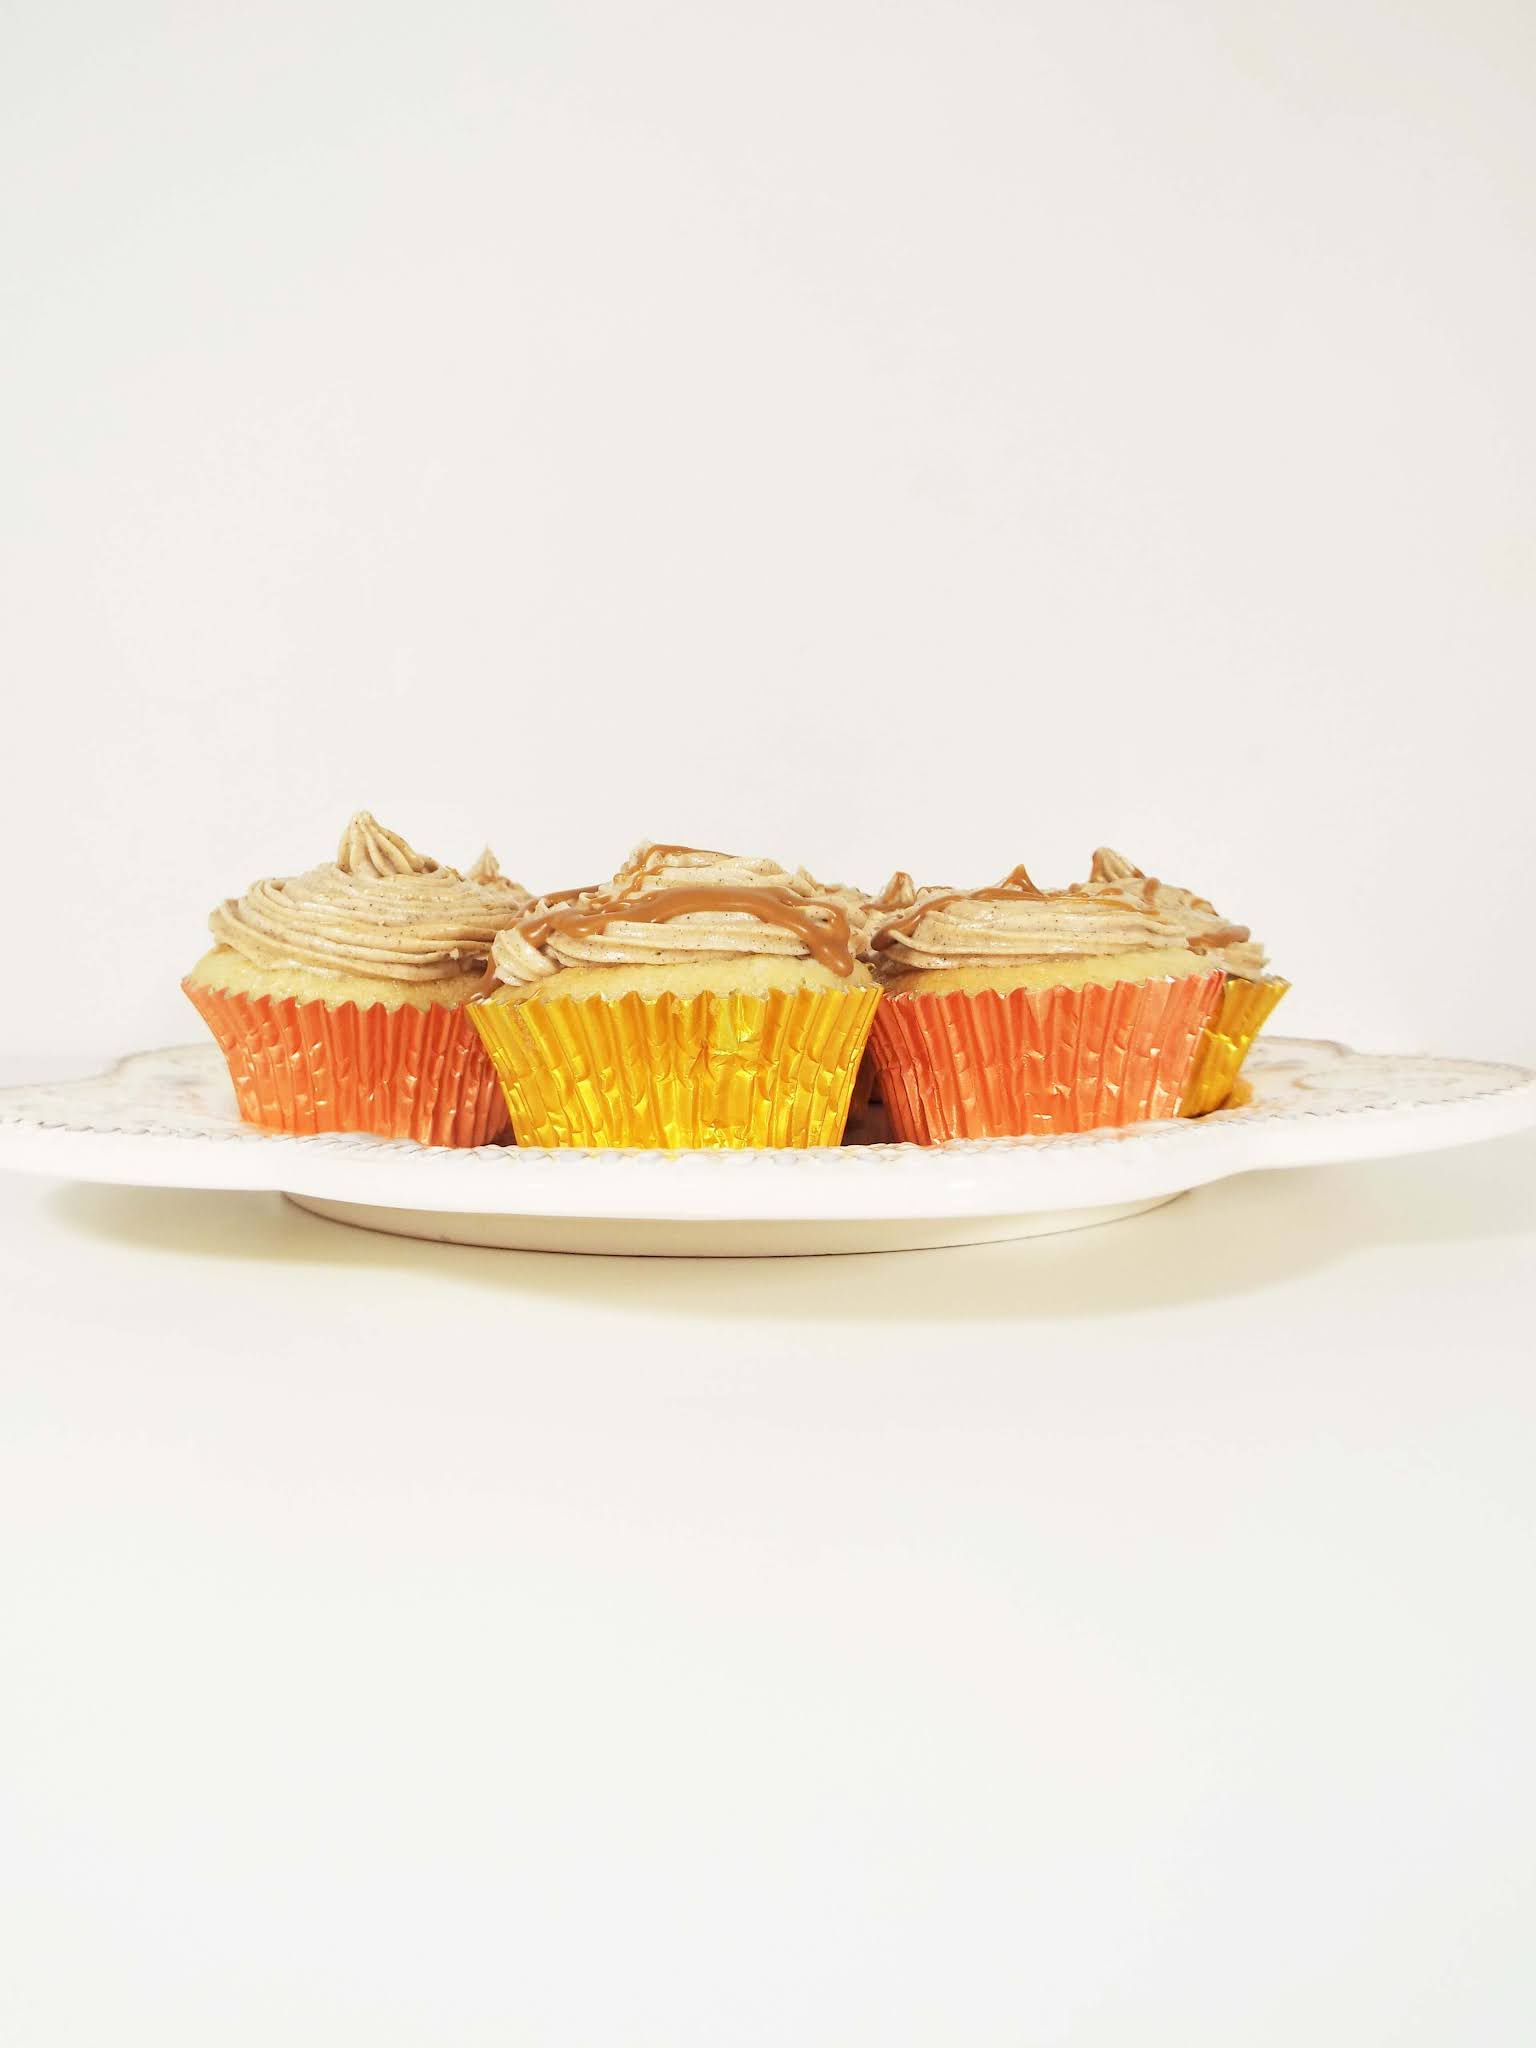 Biscoff cupcakes wrapped in gold and copper cases, displayed on a cake plate.